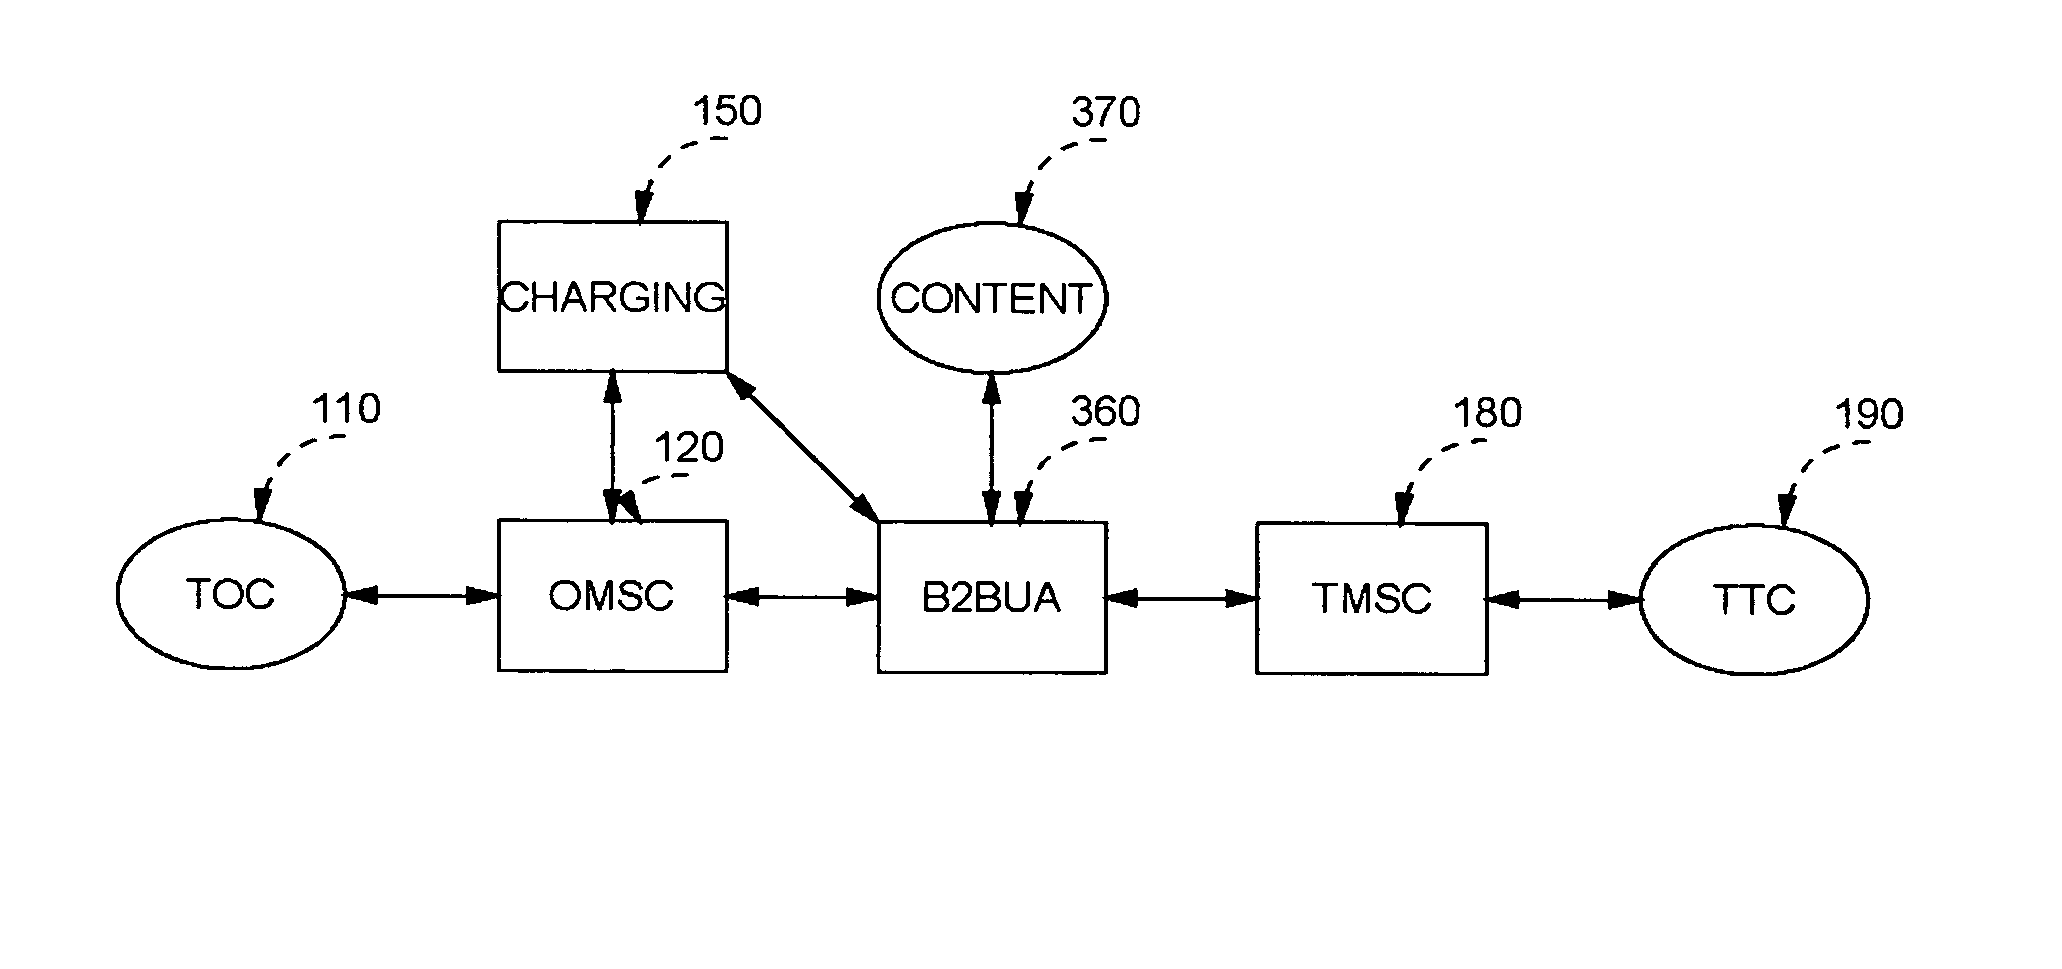 Method and apparatus for providing interactive media during communication in channel-based media telecommunication protocols